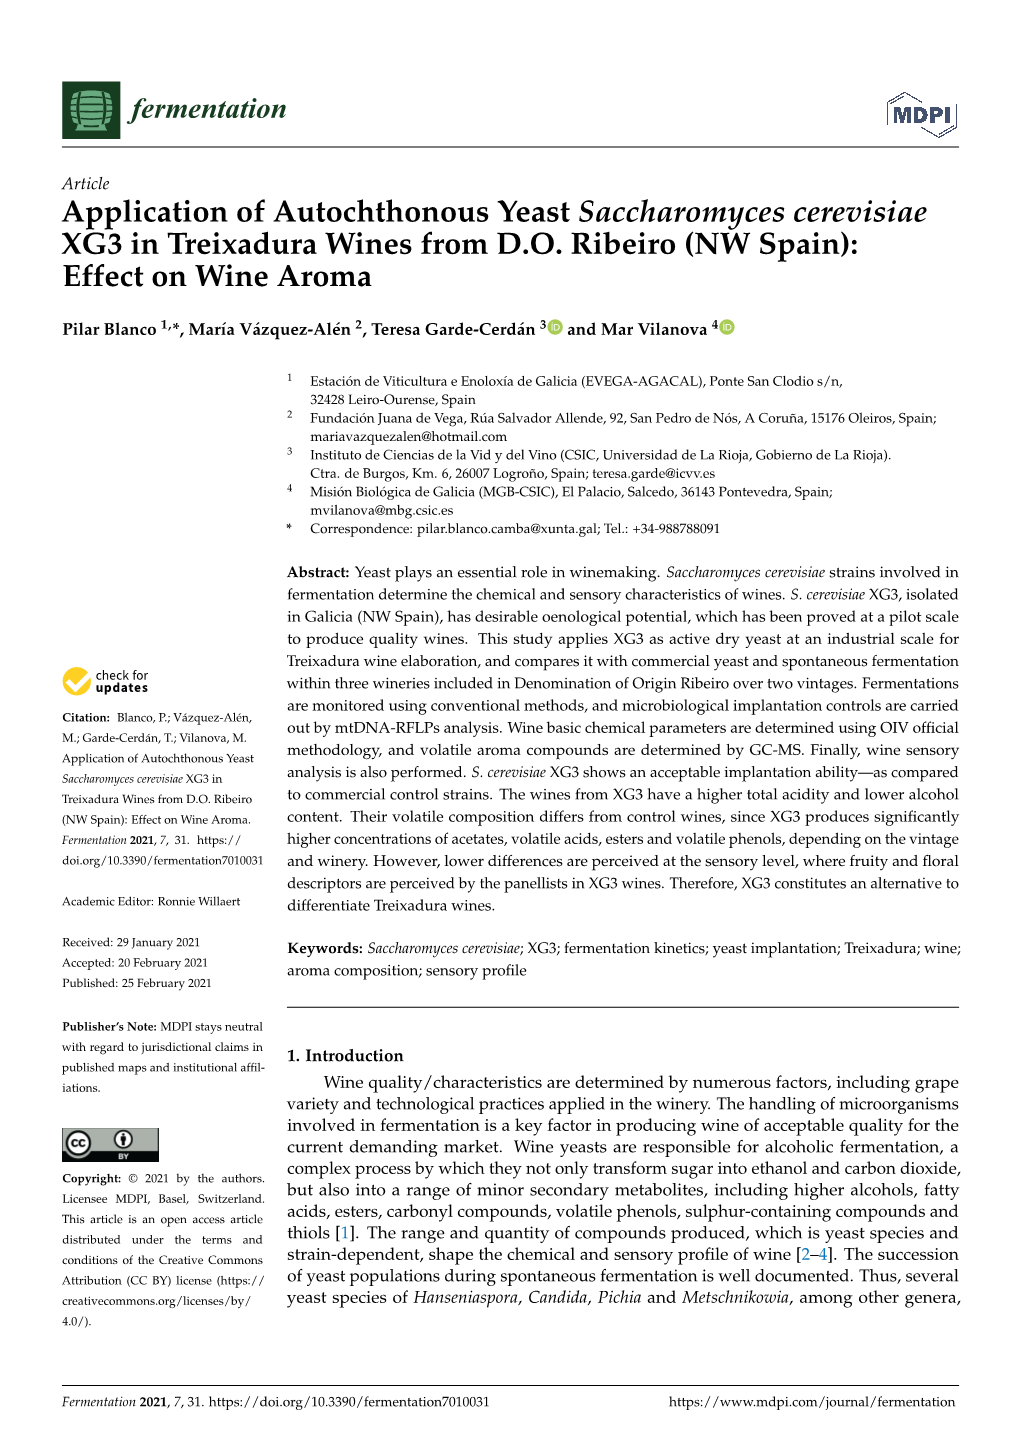 Application of Autochthonous Yeast Saccharomyces Cerevisiae XG3 in Treixadura Wines from DO Ribeiro